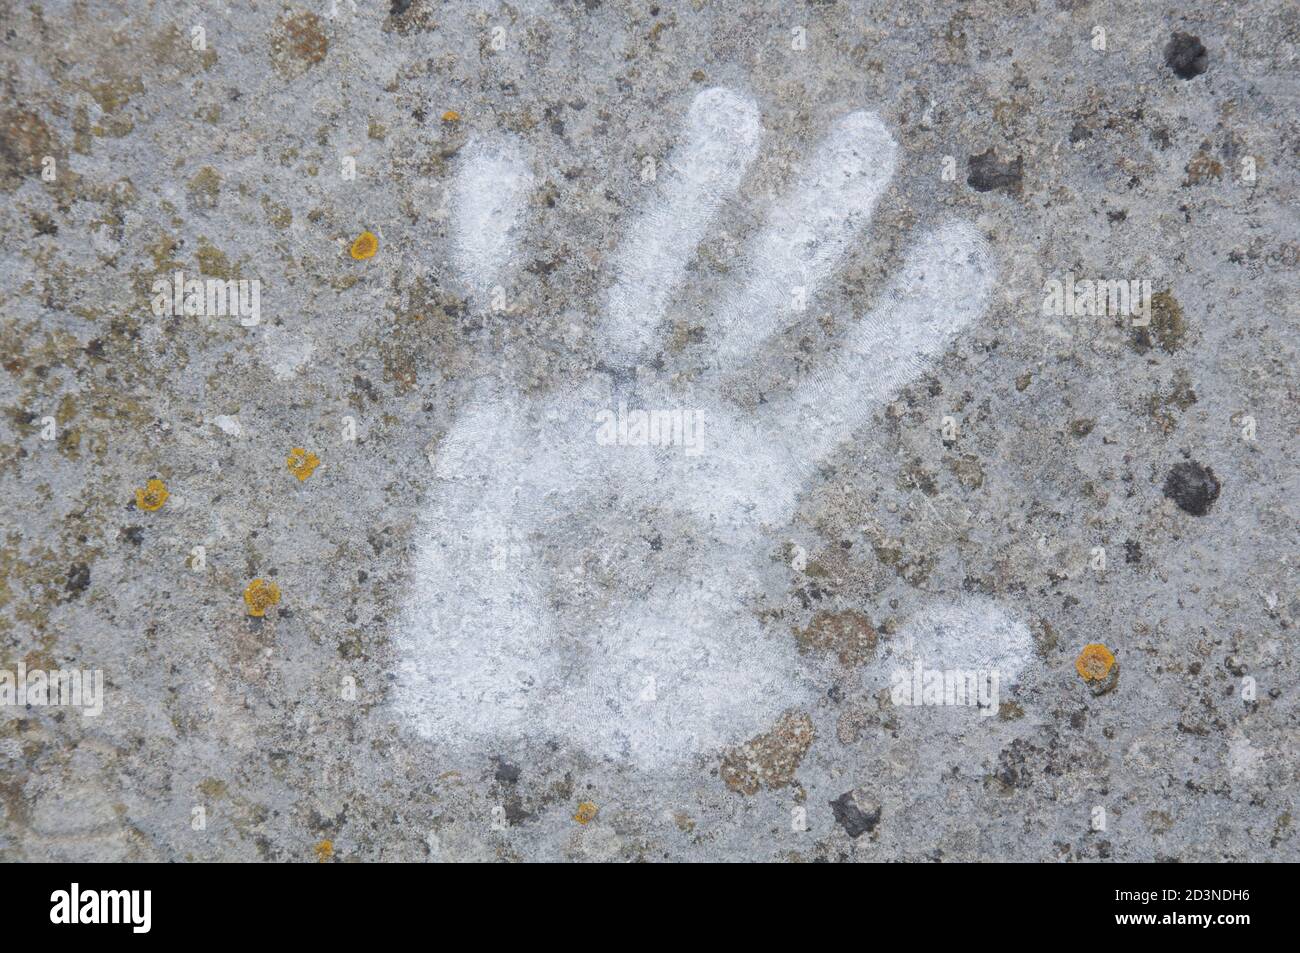 A white powdery hand print marks a rough limestone surface. The pattern of whorls on the palm and fingers are clearly imprinted. Isle of Portland, UK. Stock Photo